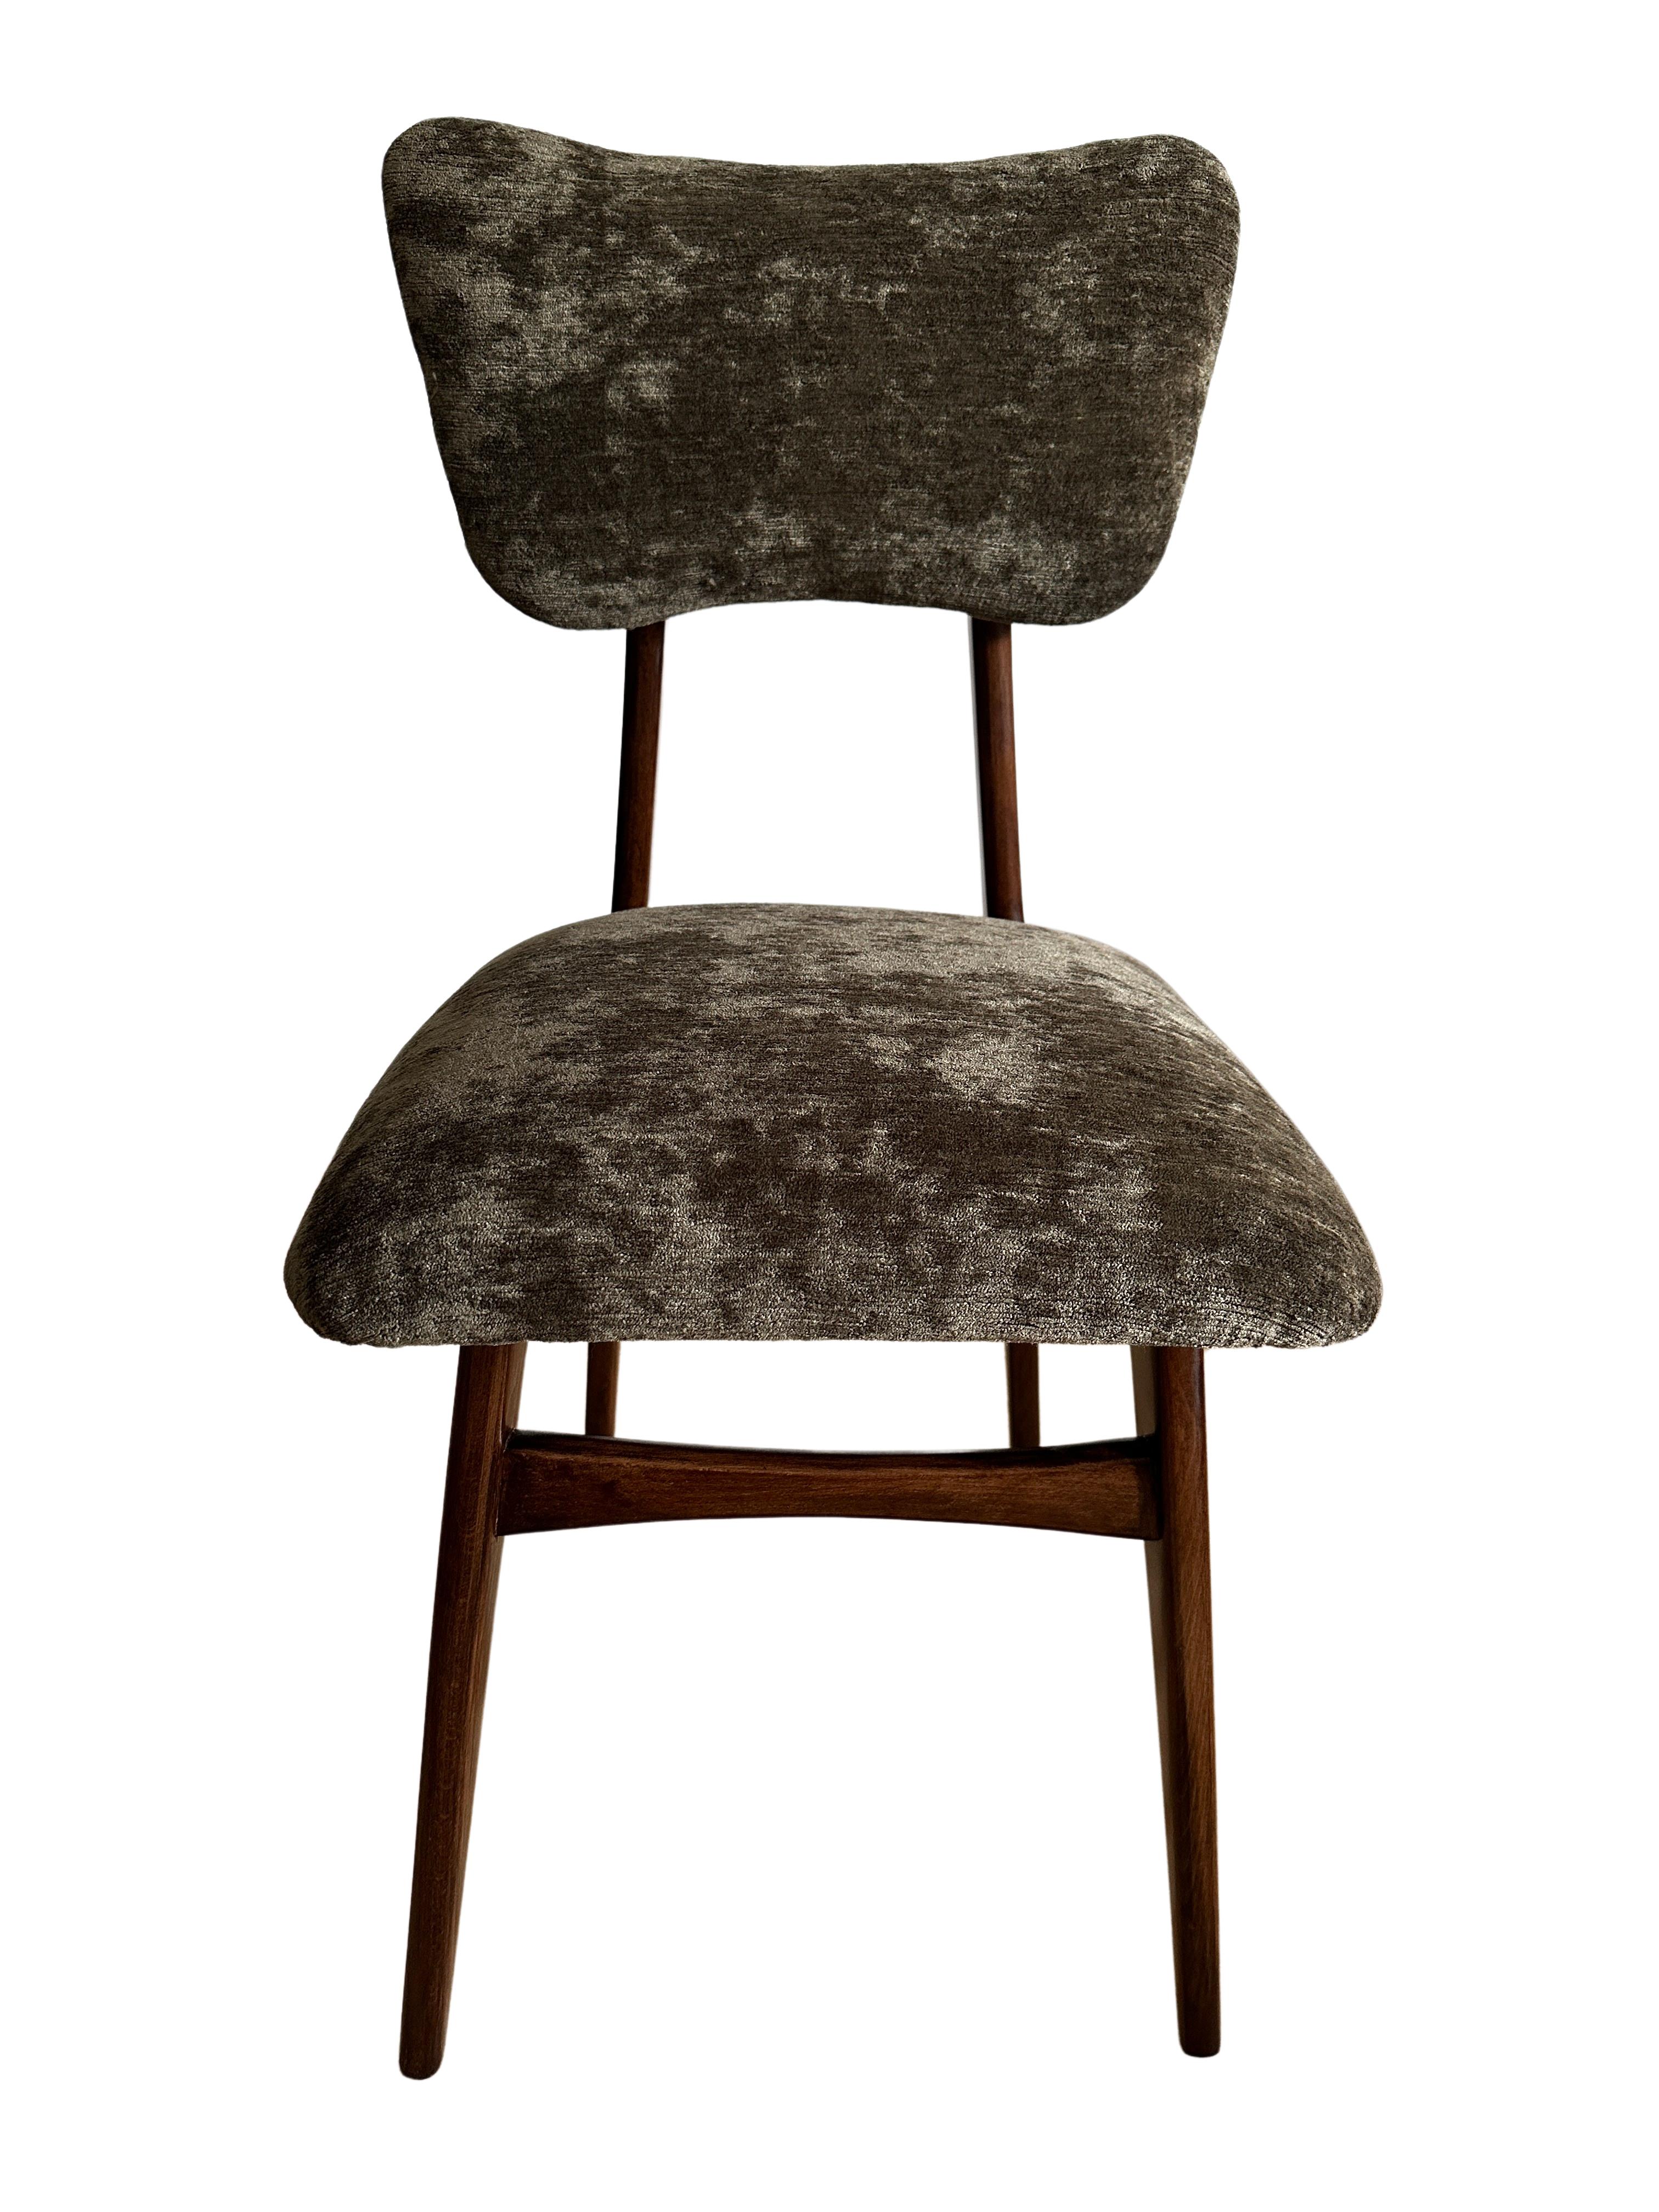 Bouclé Set of Two Midcentury Dining Chairs in Green Velvet Upholstery, Poland, 1960s For Sale